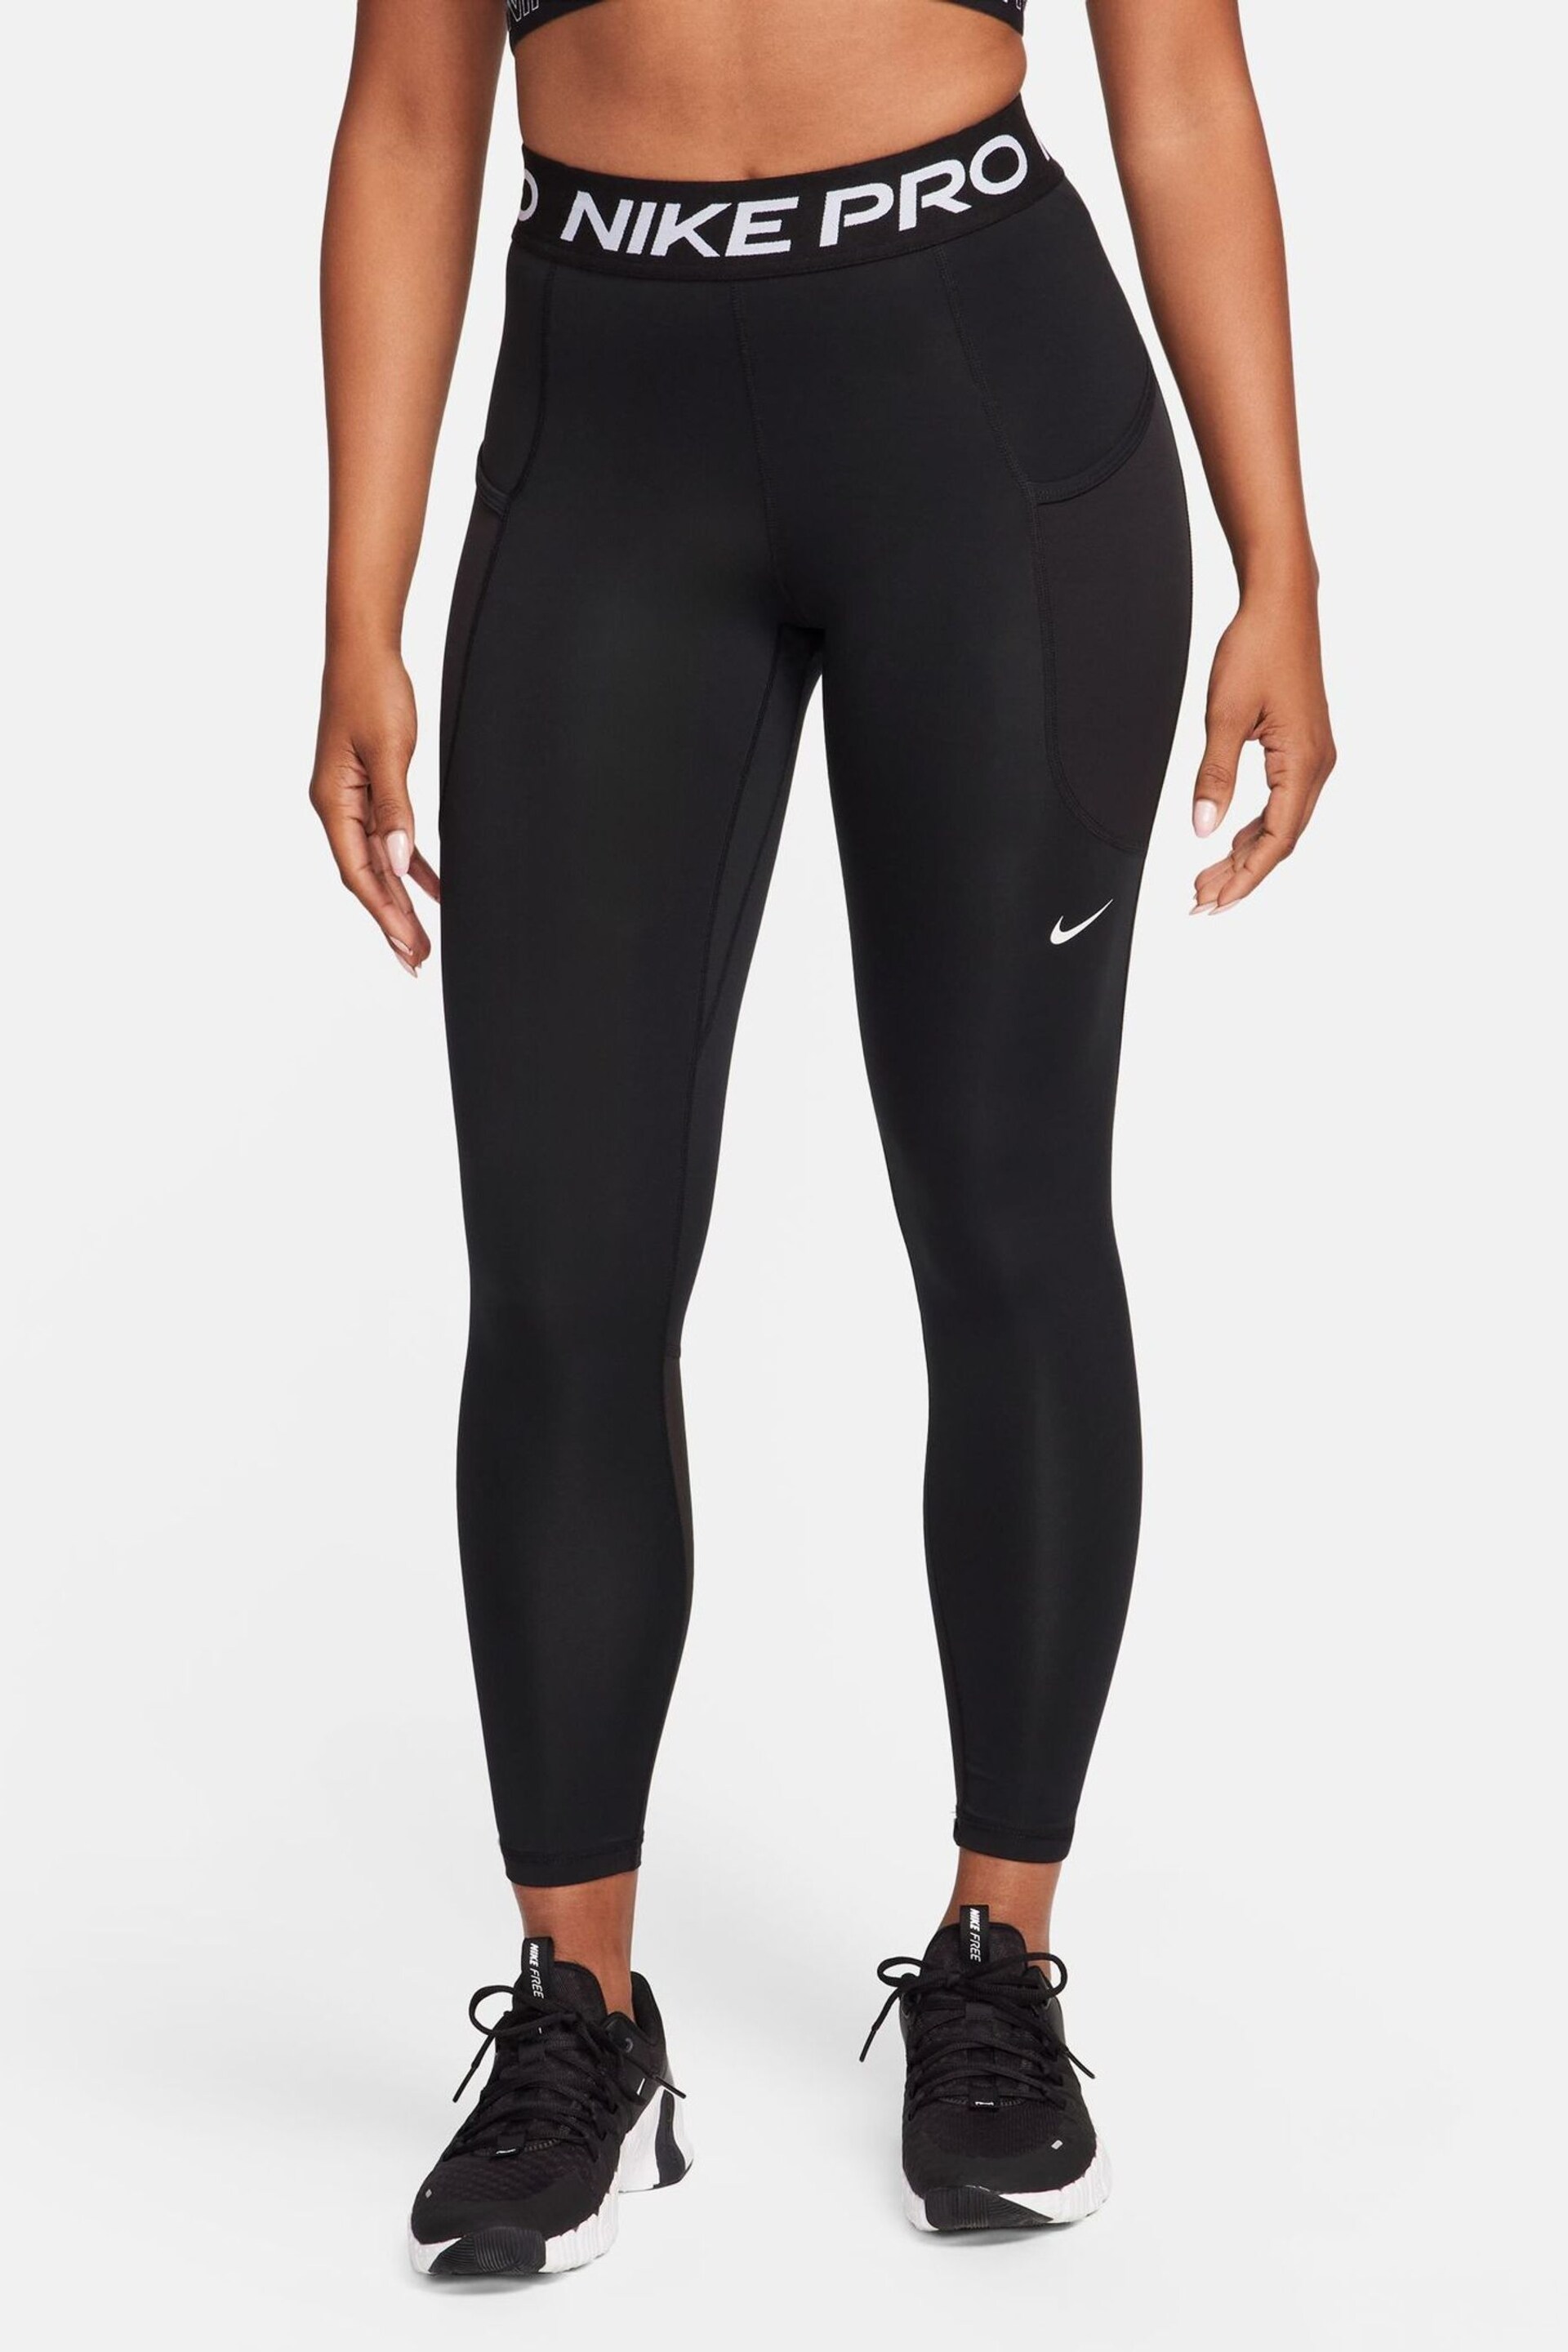 Nike Black Pro Dri-FIT 365 Mid-Rise 7/8 Leggings with Pockets - Image 1 of 7